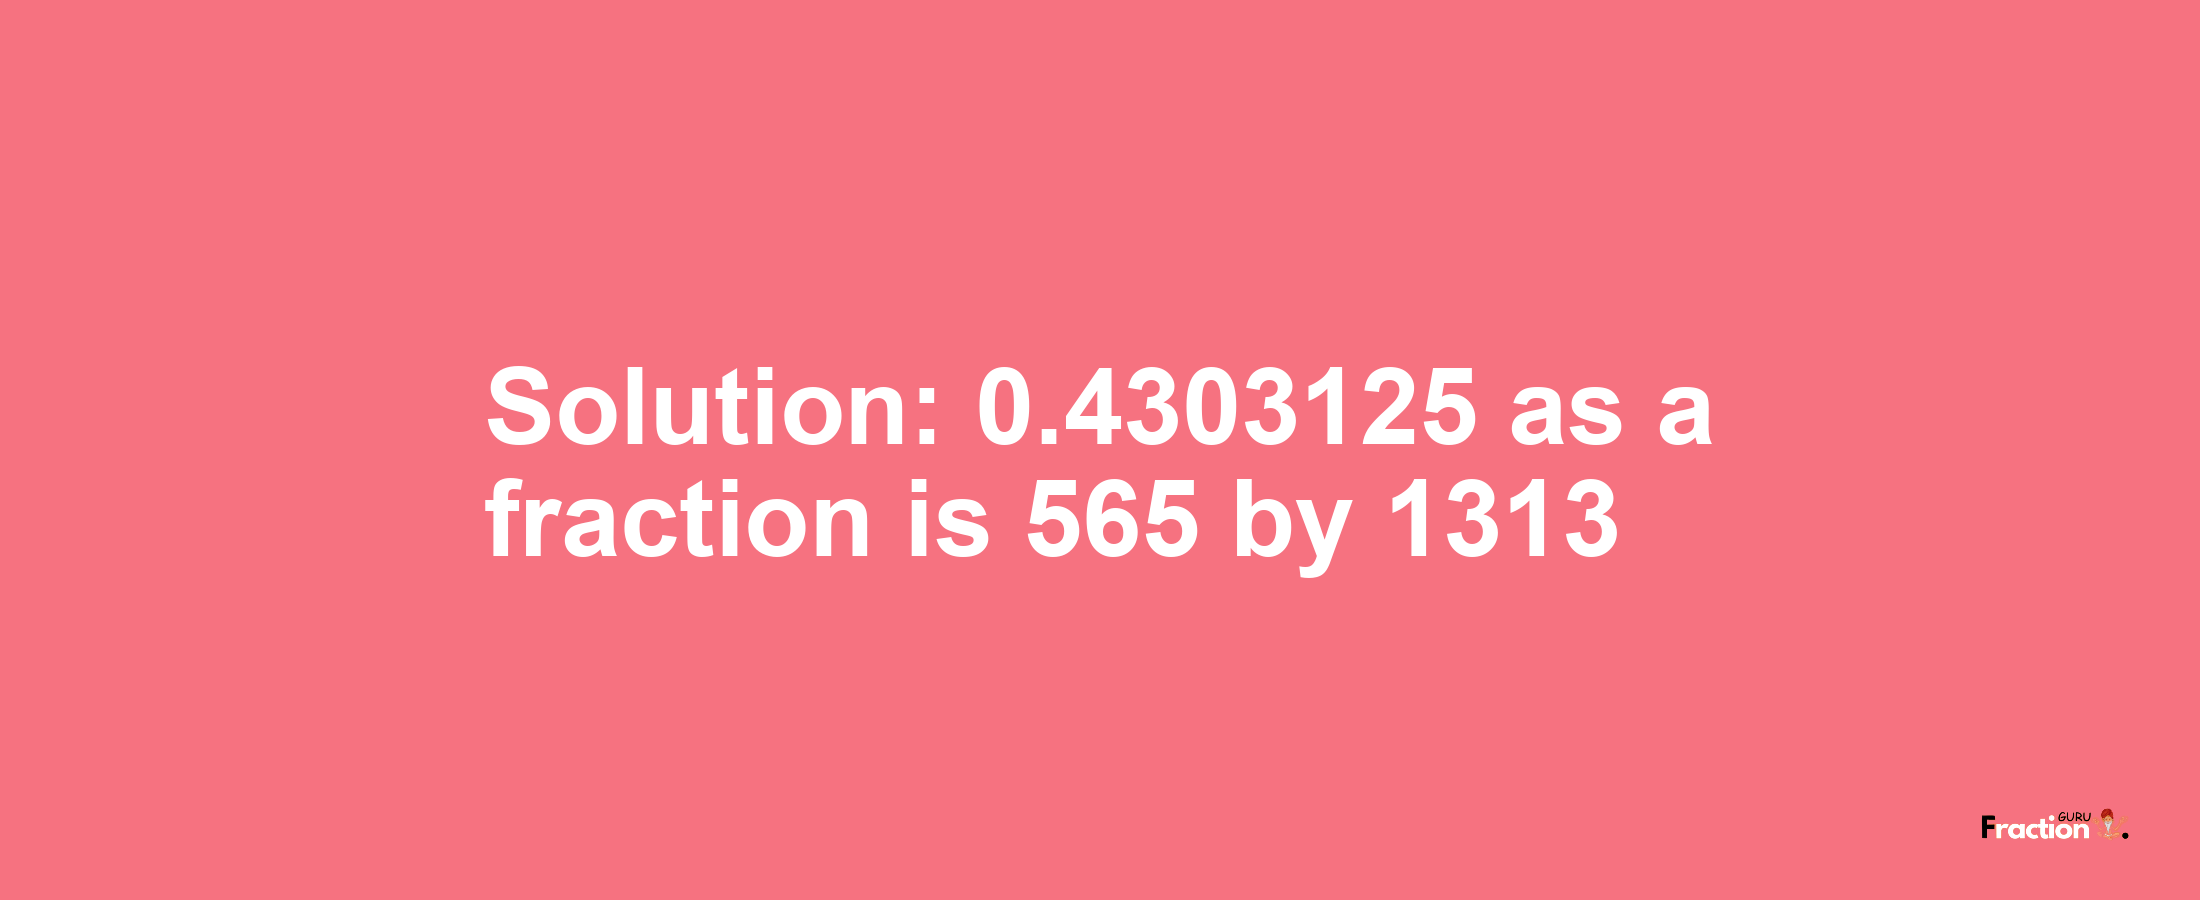 Solution:0.4303125 as a fraction is 565/1313